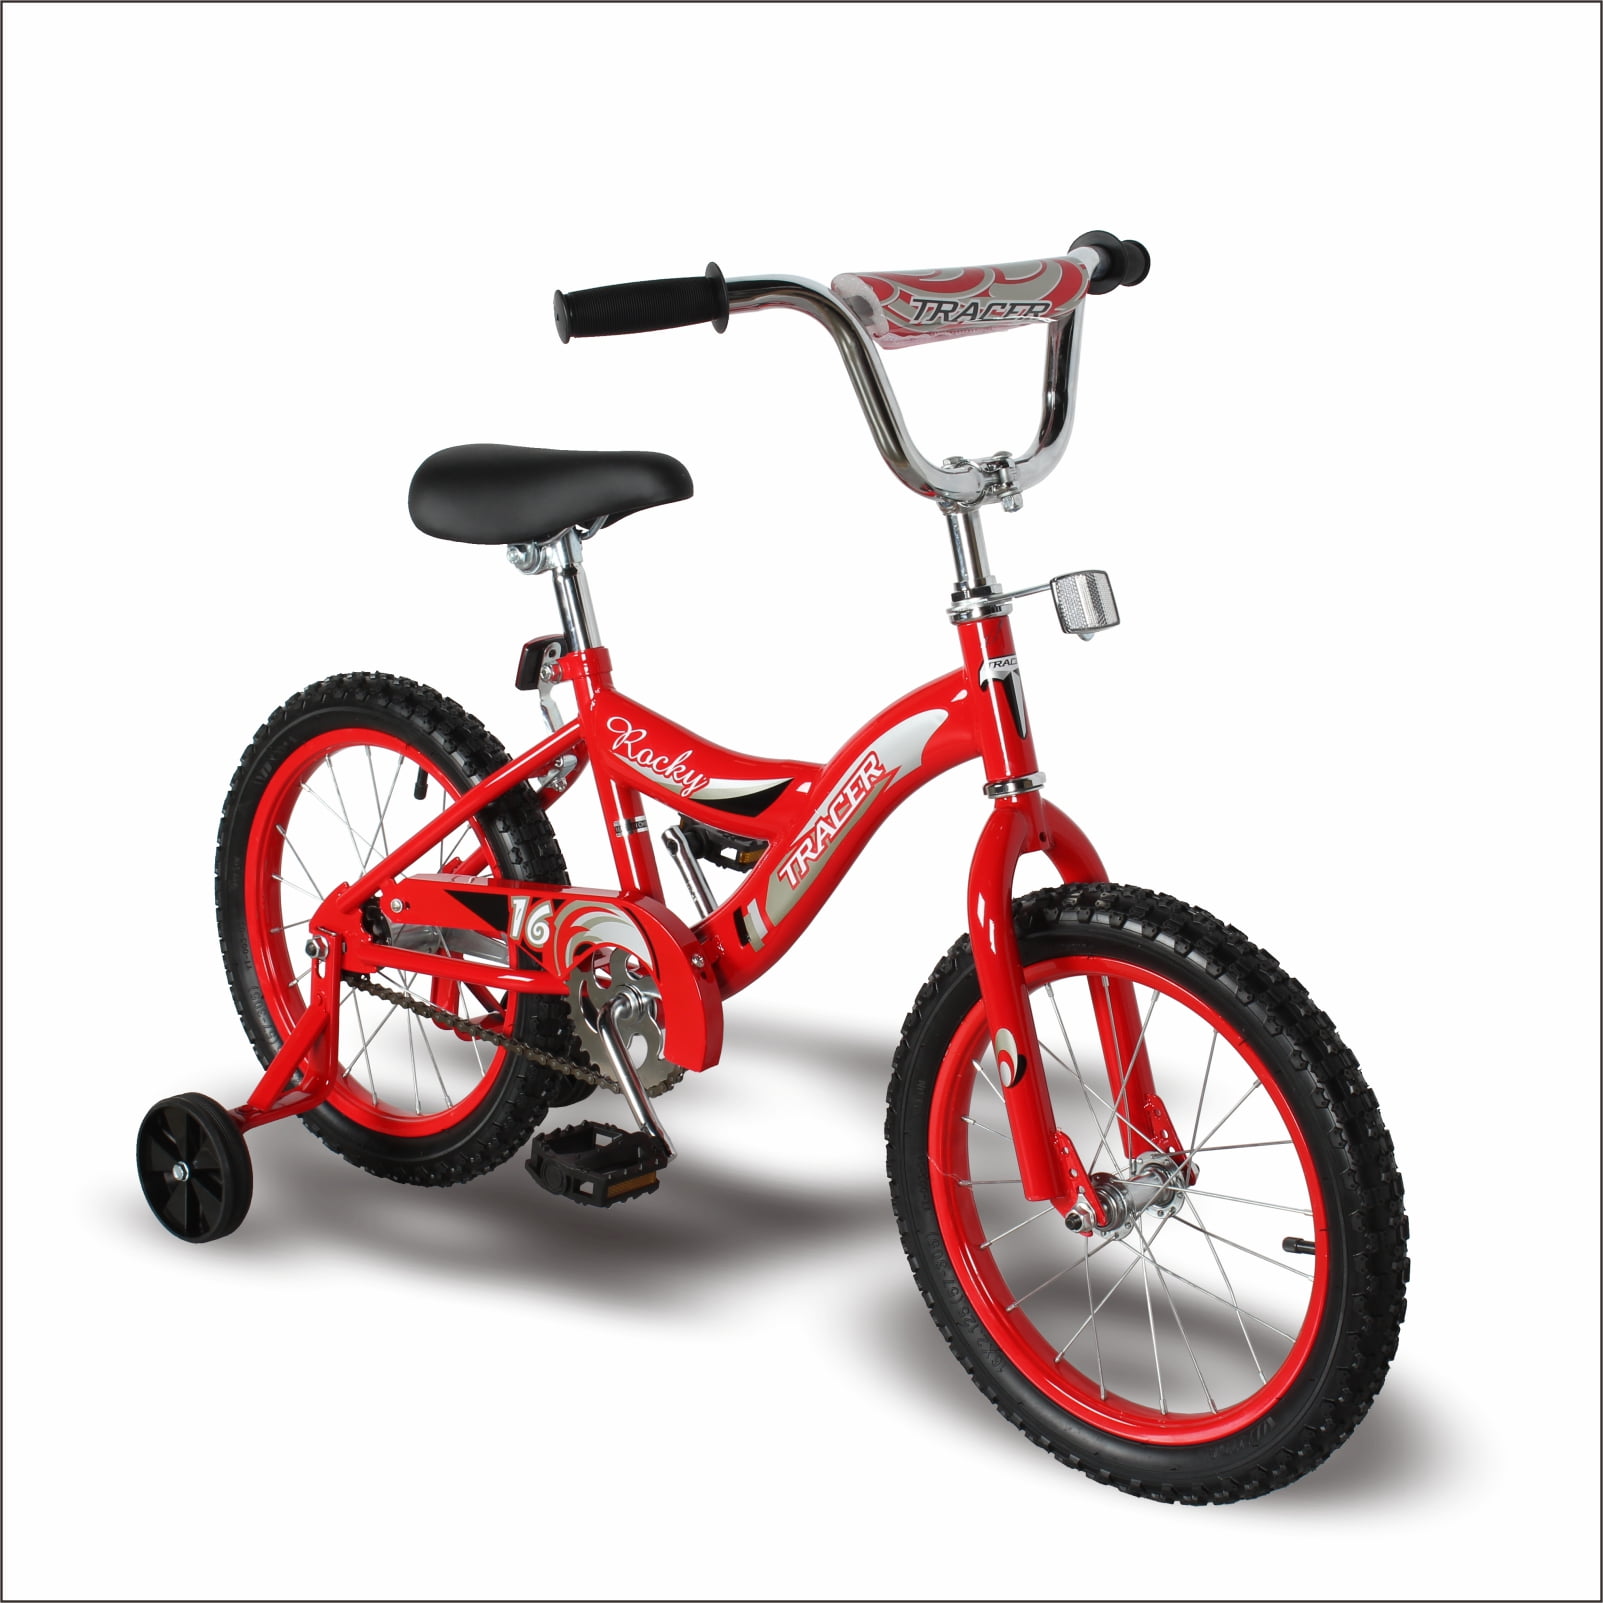 2023 TRACER Rocky 16 inchs BMX Freestyle Kids Bike with Training Wheels for Boys and Girls, Red Color